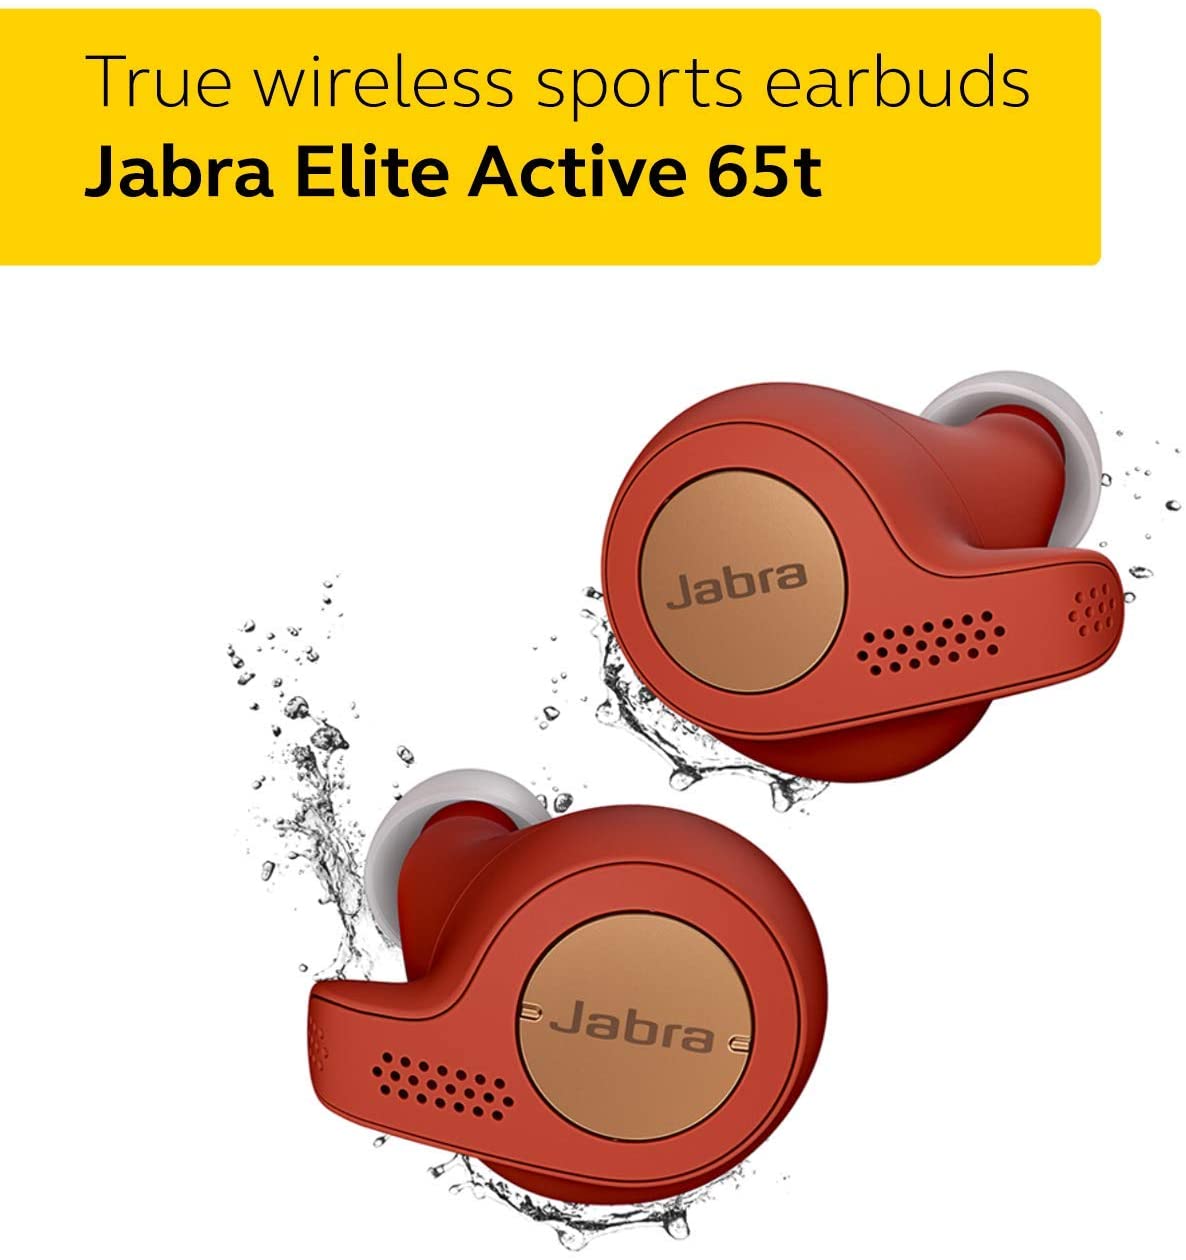 Jabra Elite Active 65t Earbuds – Passive Noise Isolating Bluetooth Sports Earphones with Motion Sensor for Fitness Tracking – True Wireless Calls and Music – Copper Red